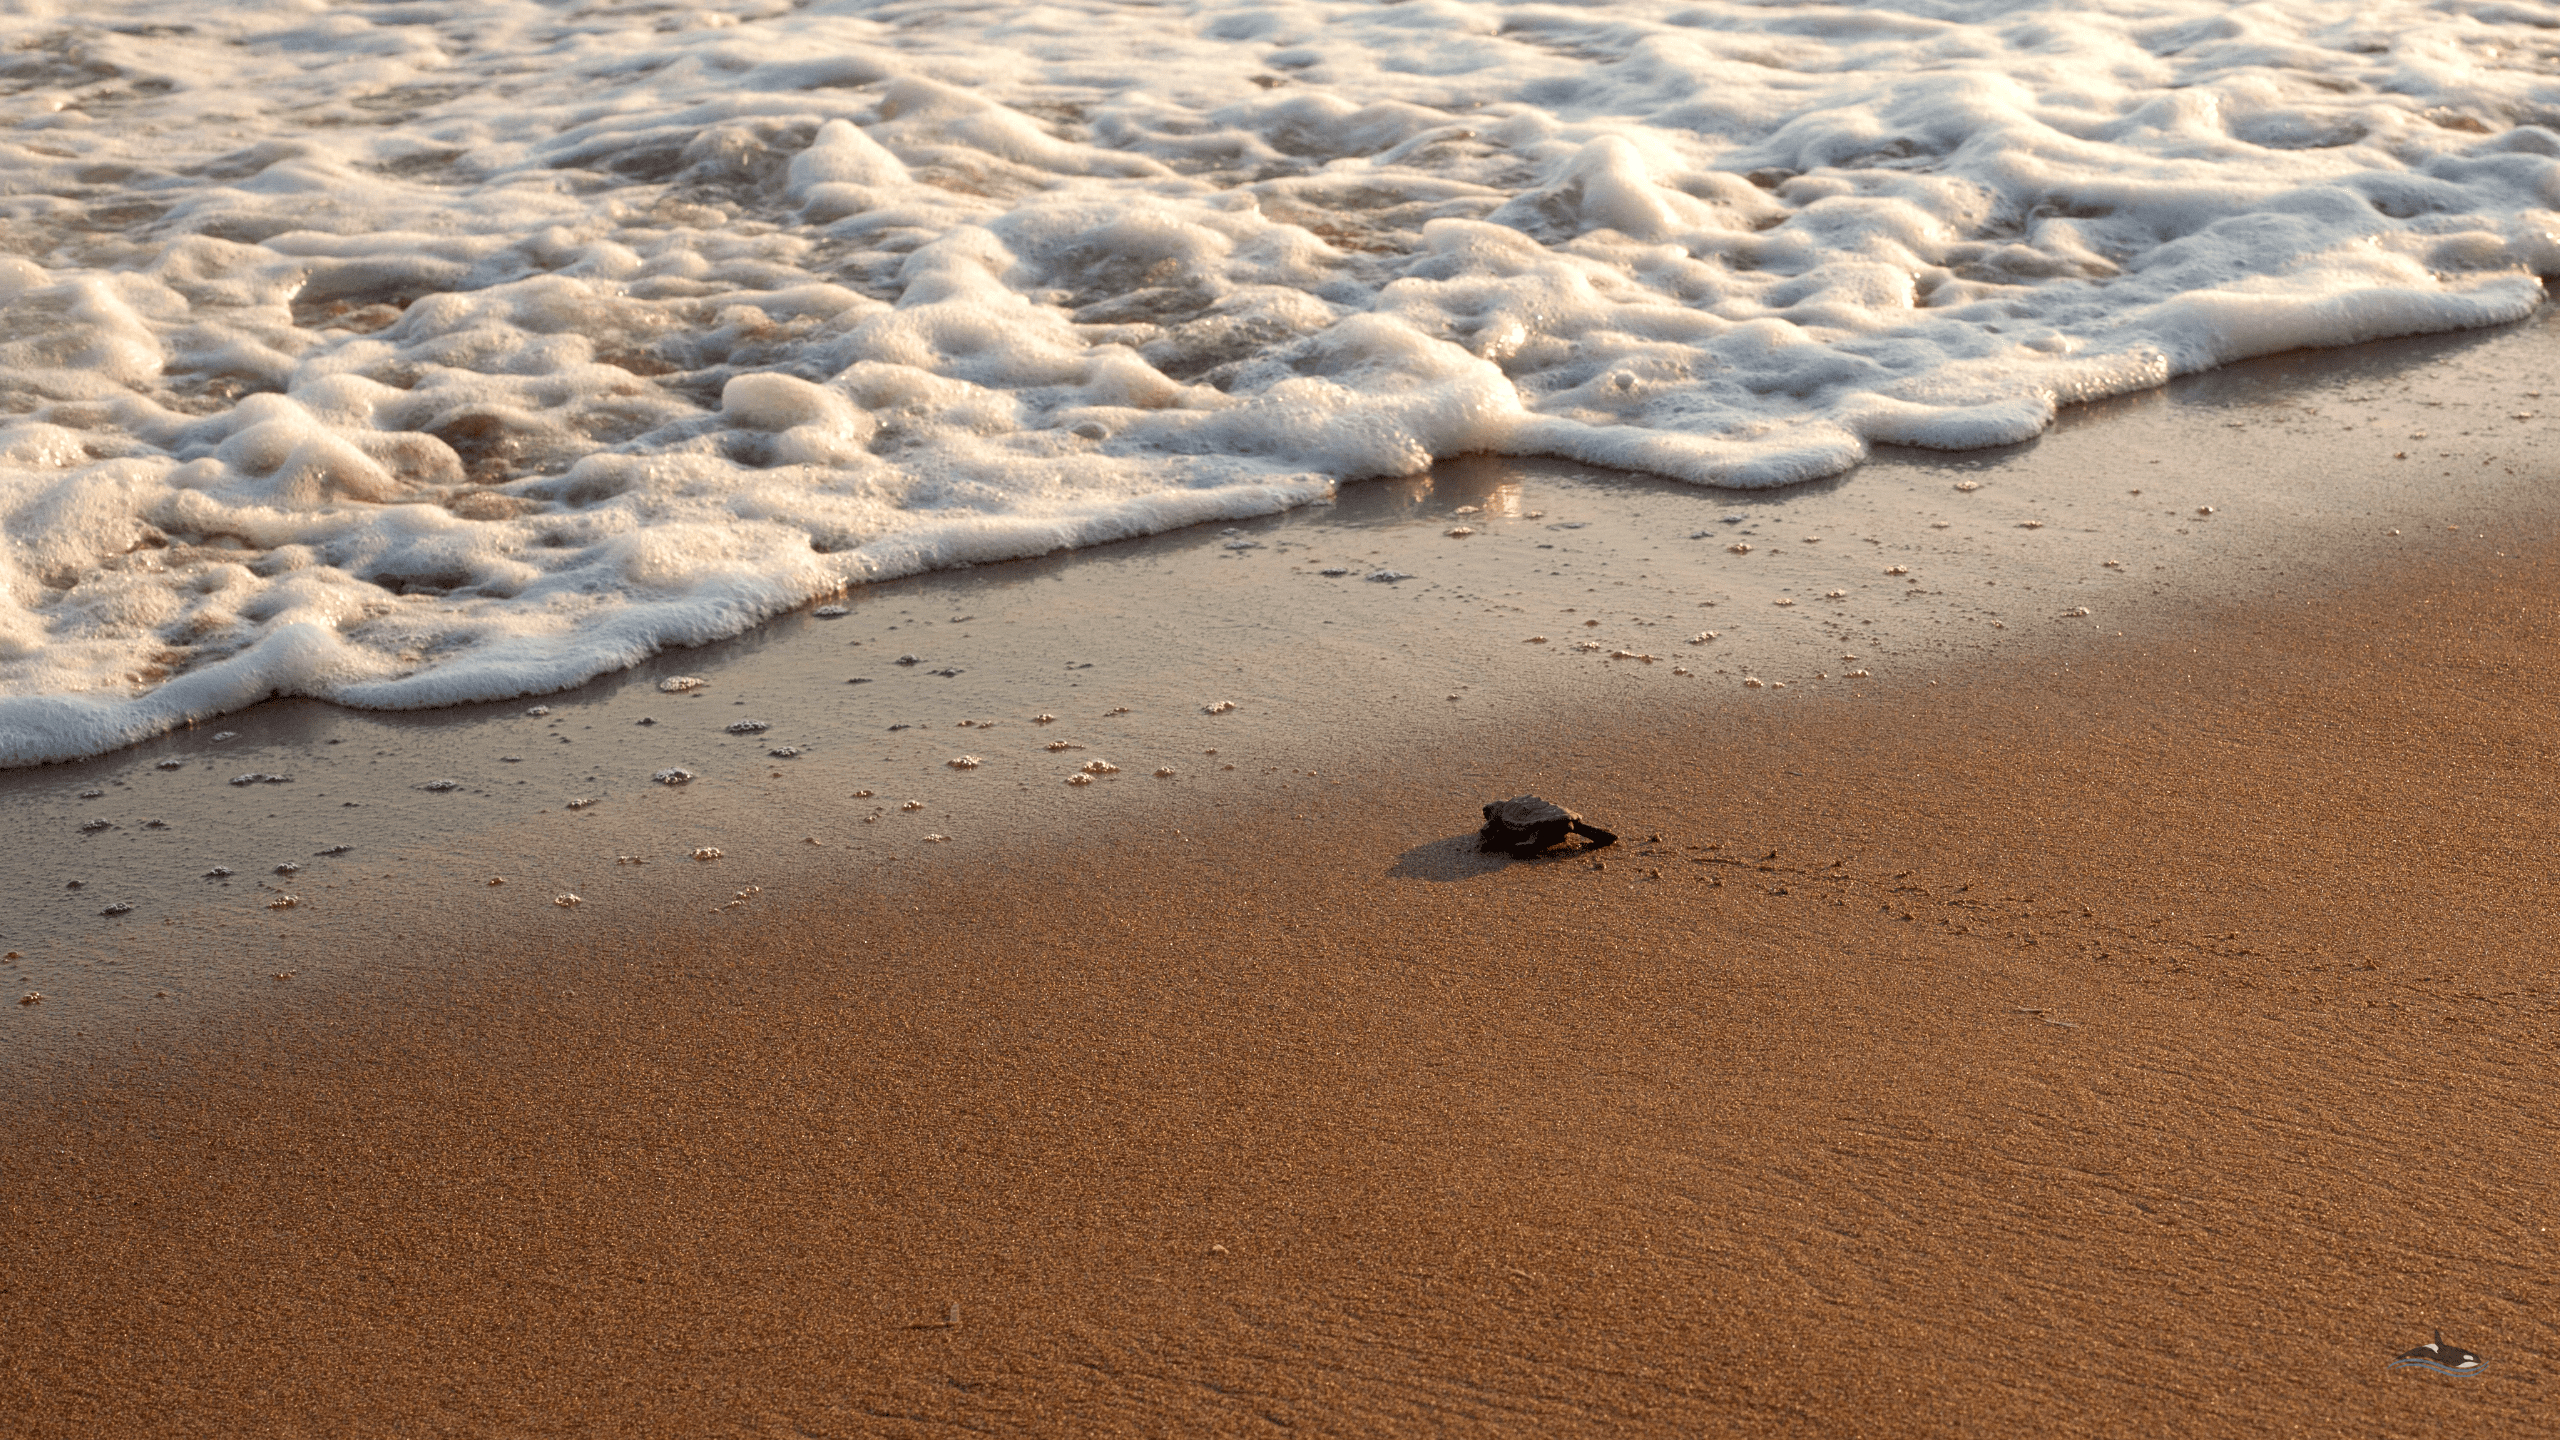 2560x1440 Baby Sea Turtles Look But Do Not Touch ~ MarineBio Conservation Society